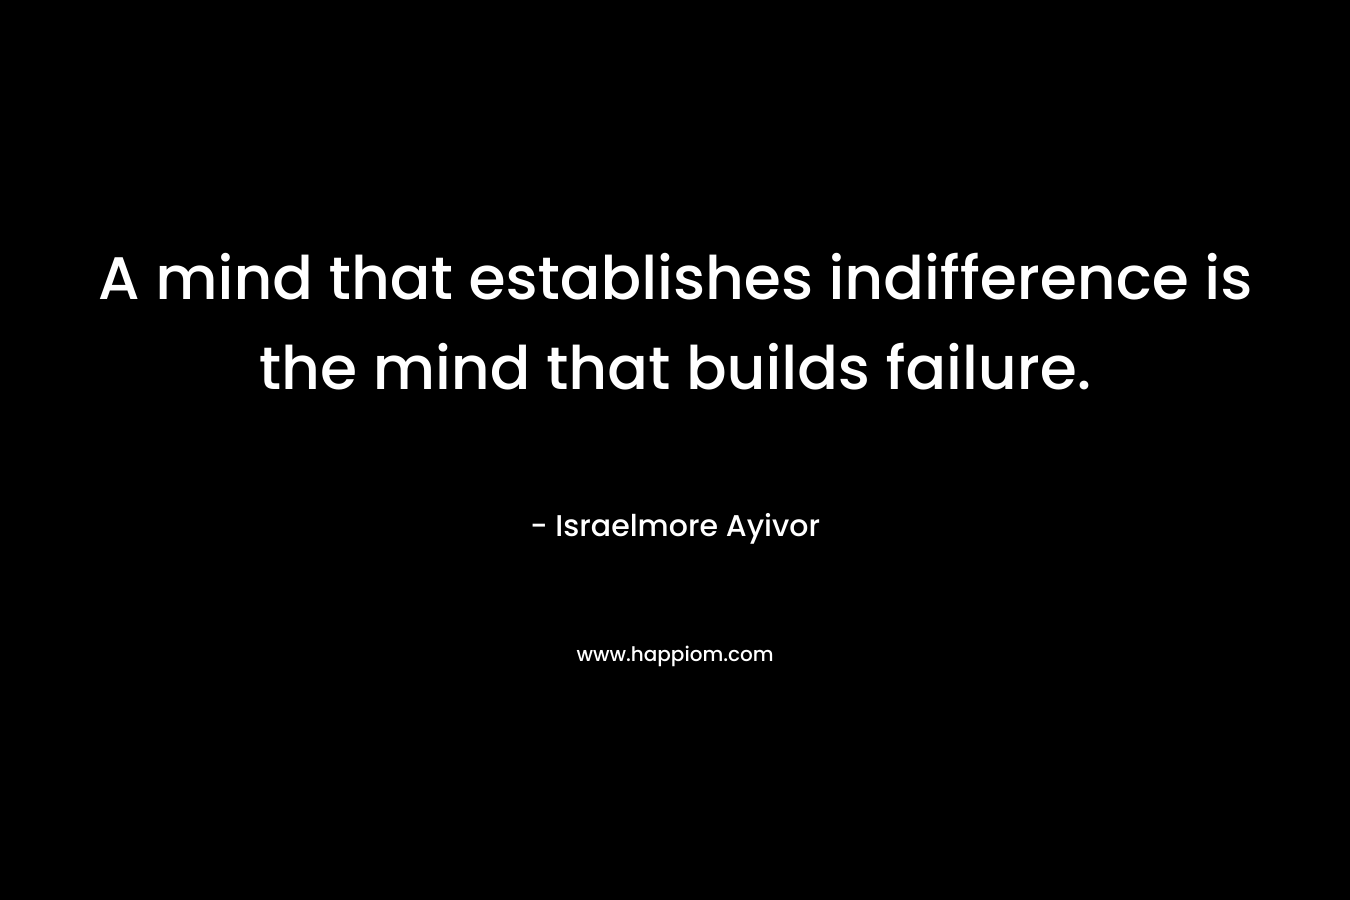 A mind that establishes indifference is the mind that builds failure. – Israelmore Ayivor